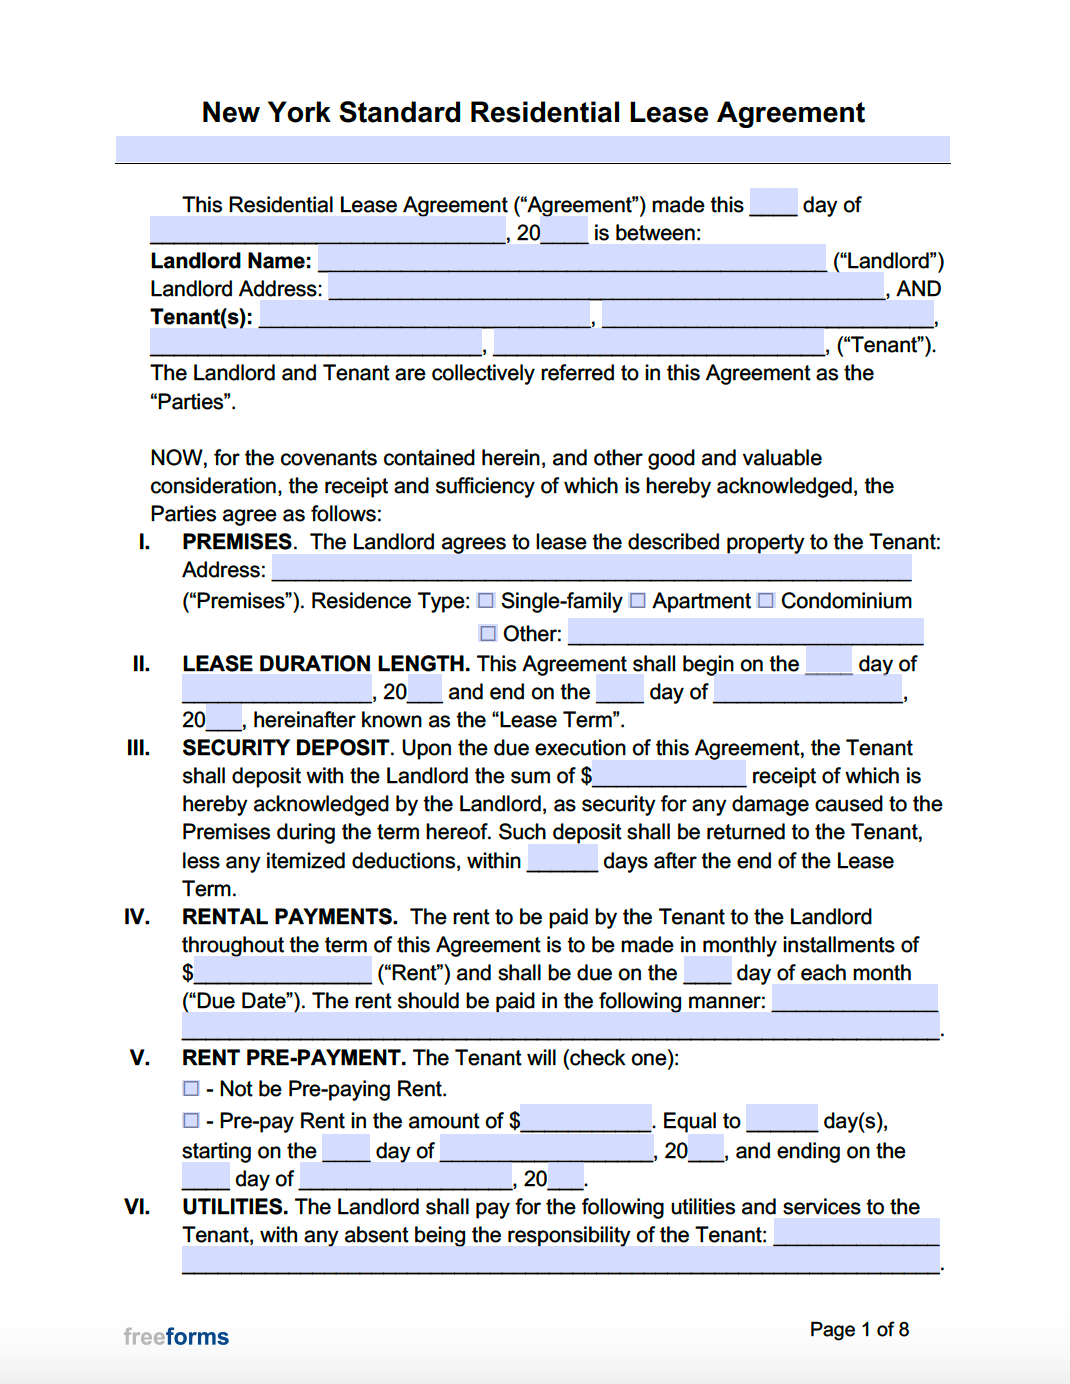 printable-ny-state-lease-form-printable-forms-free-online